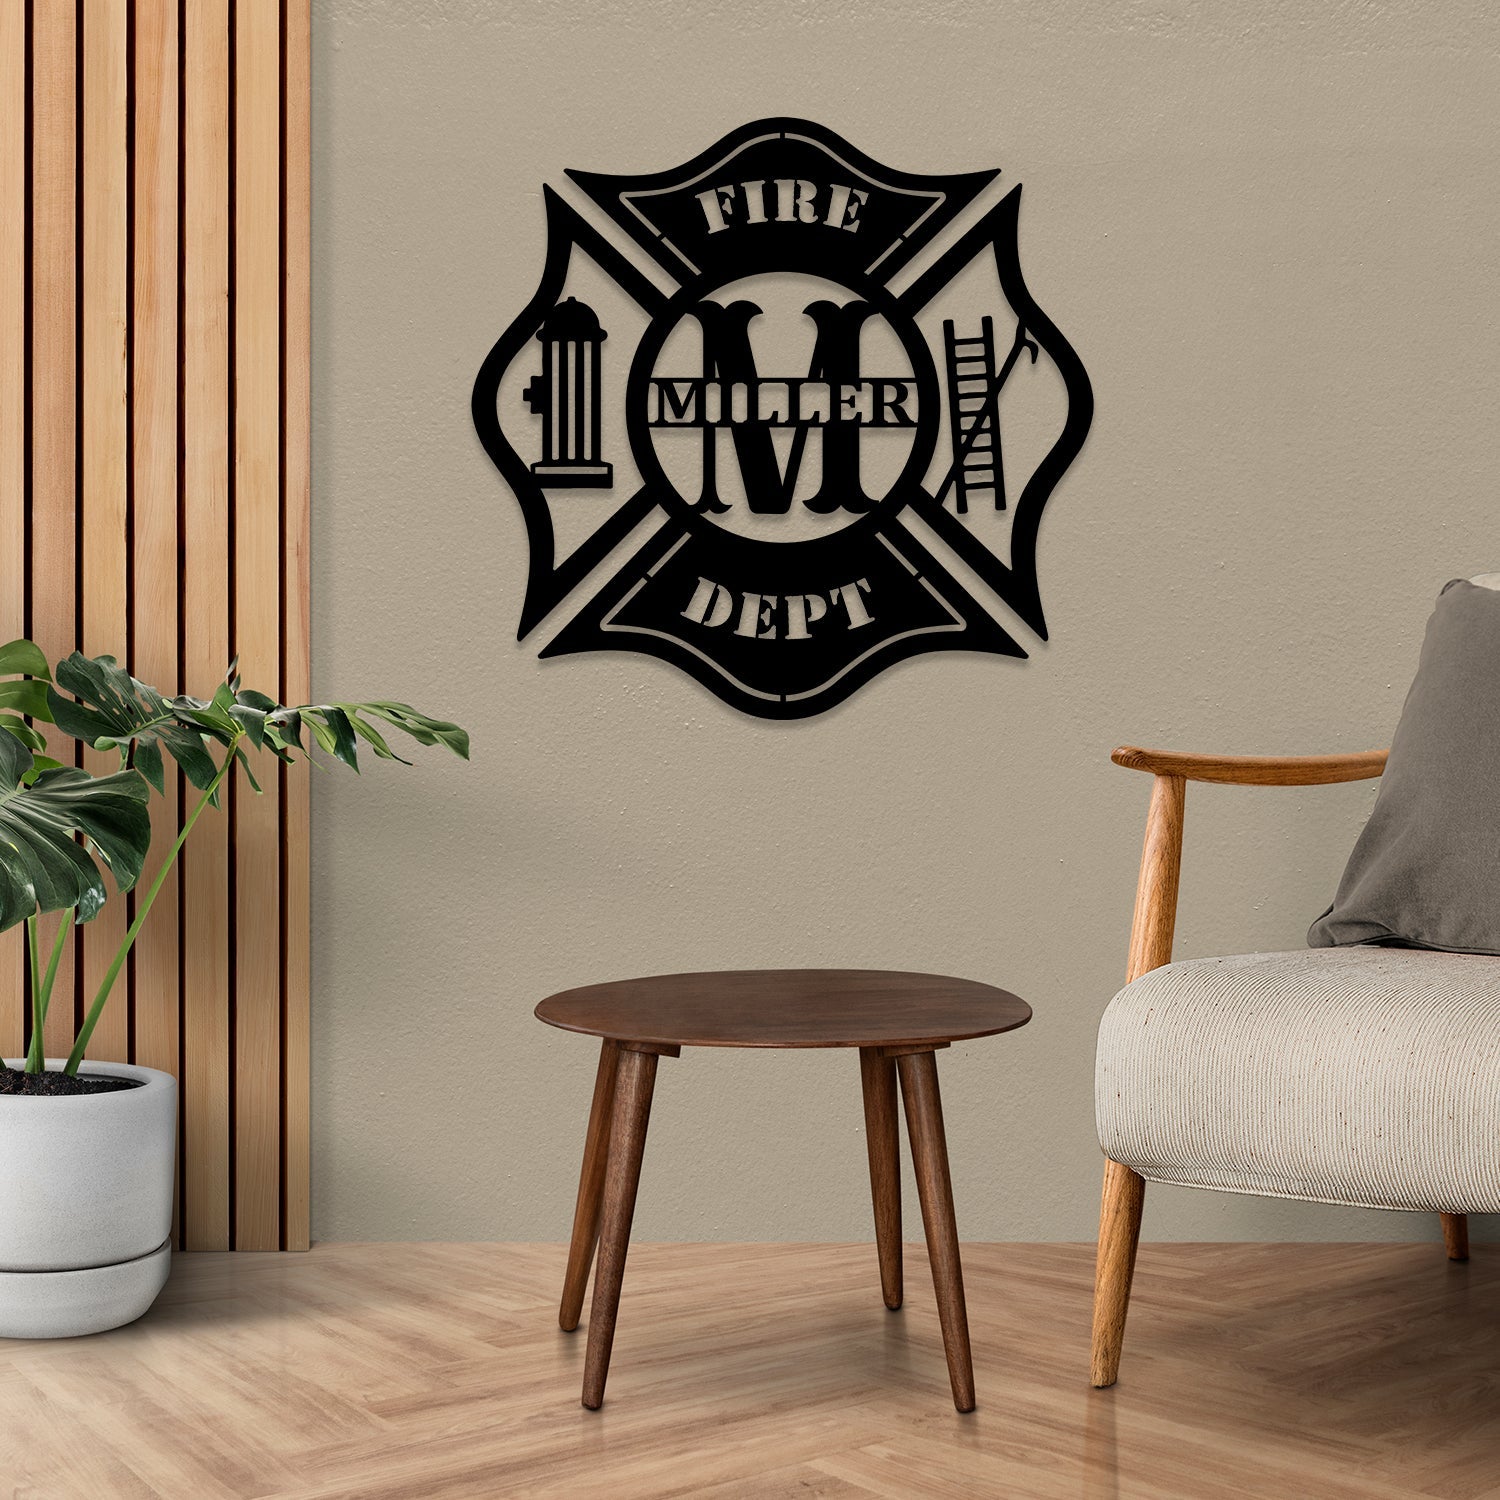 Personalized Name Fire Dept Firefighter Metal Wall Decor, Gift For Fireman